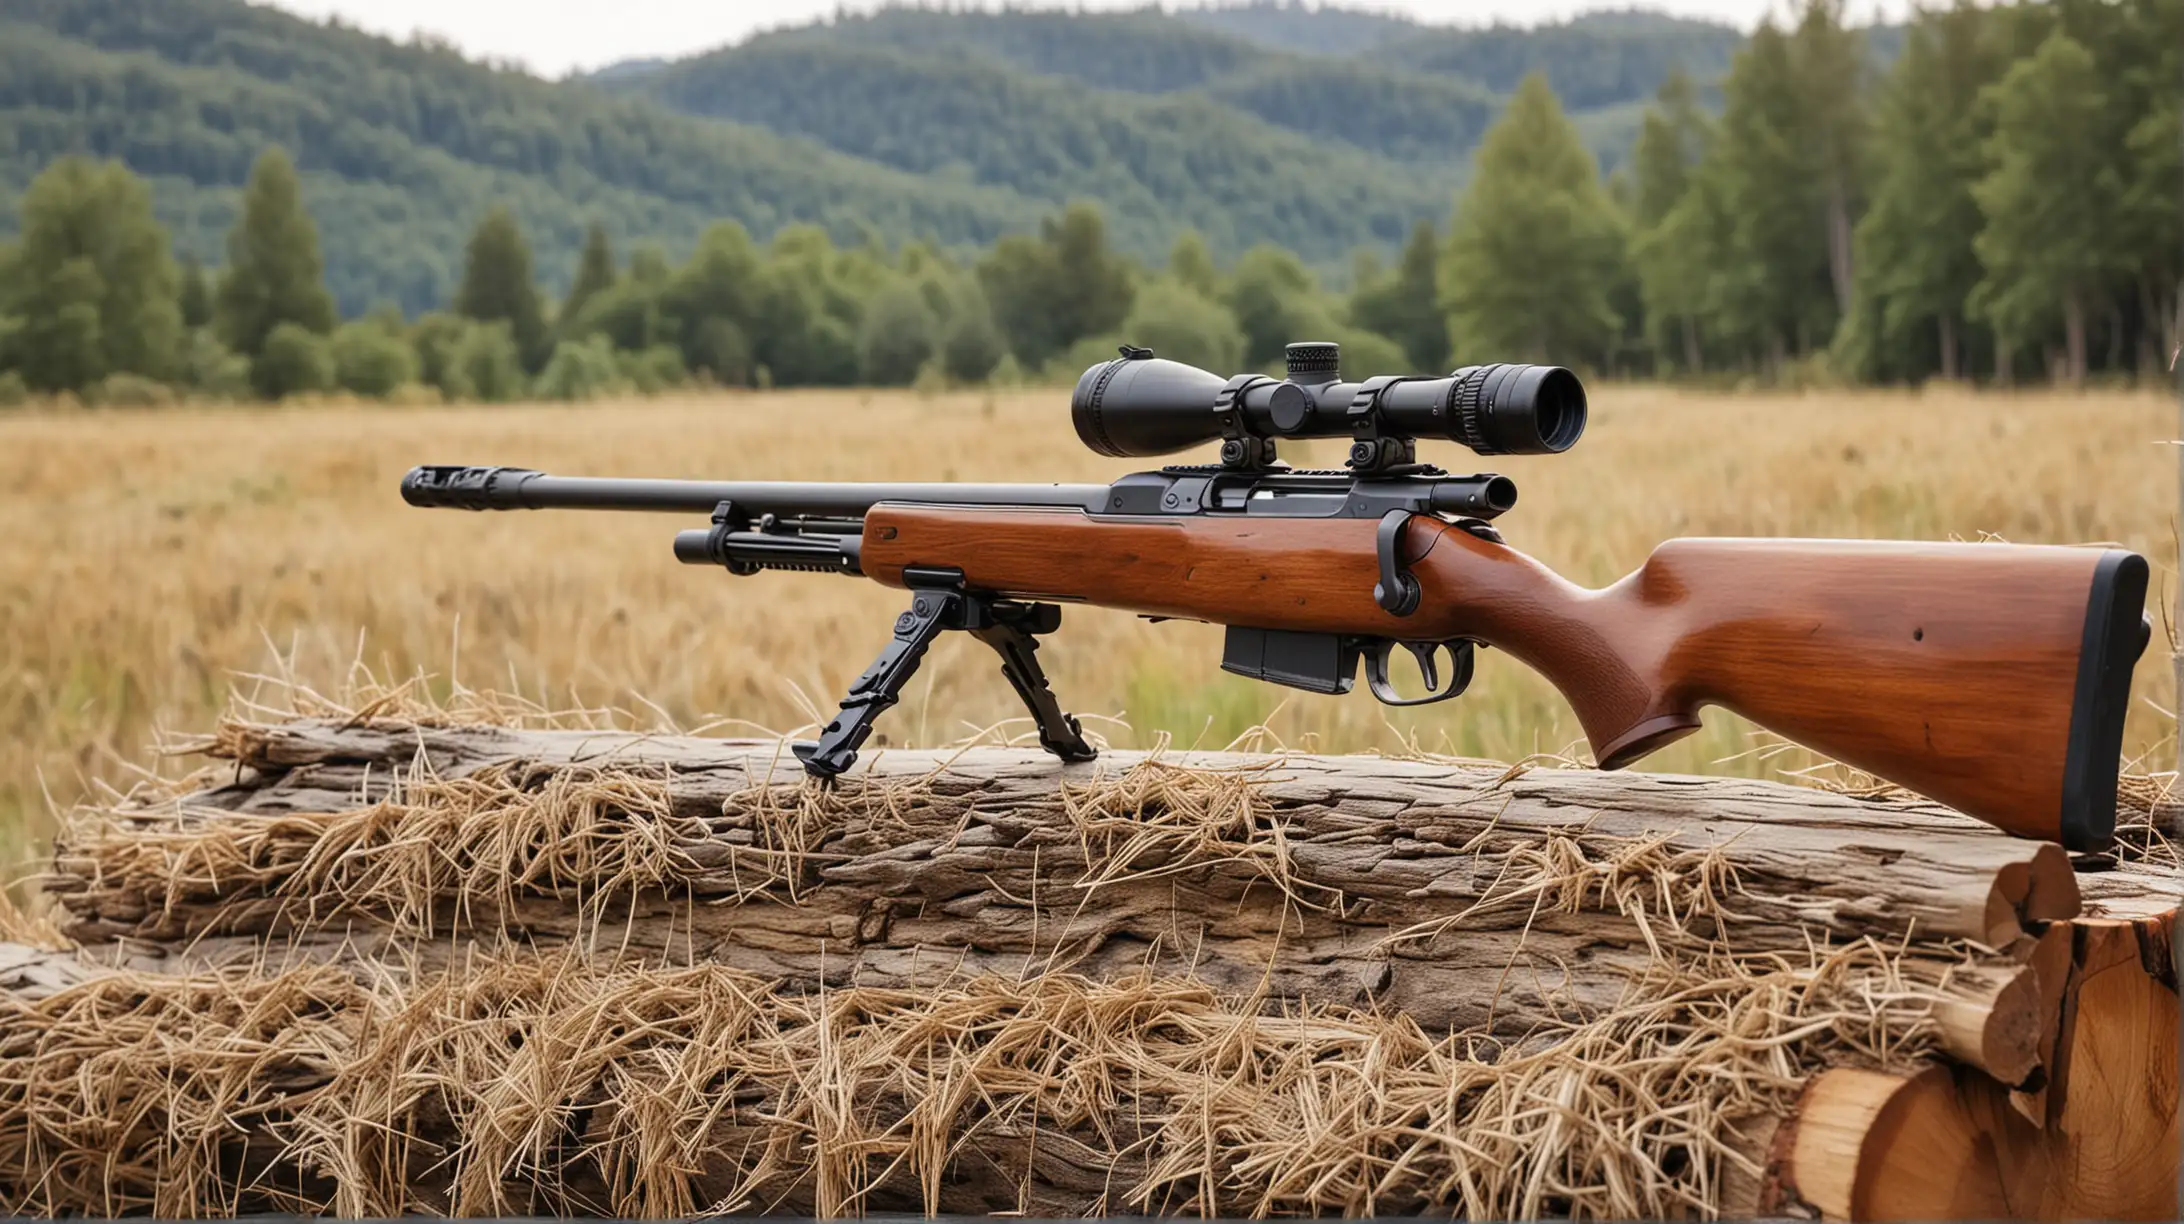 Rifle Resting on Log with Blurred Hay Background